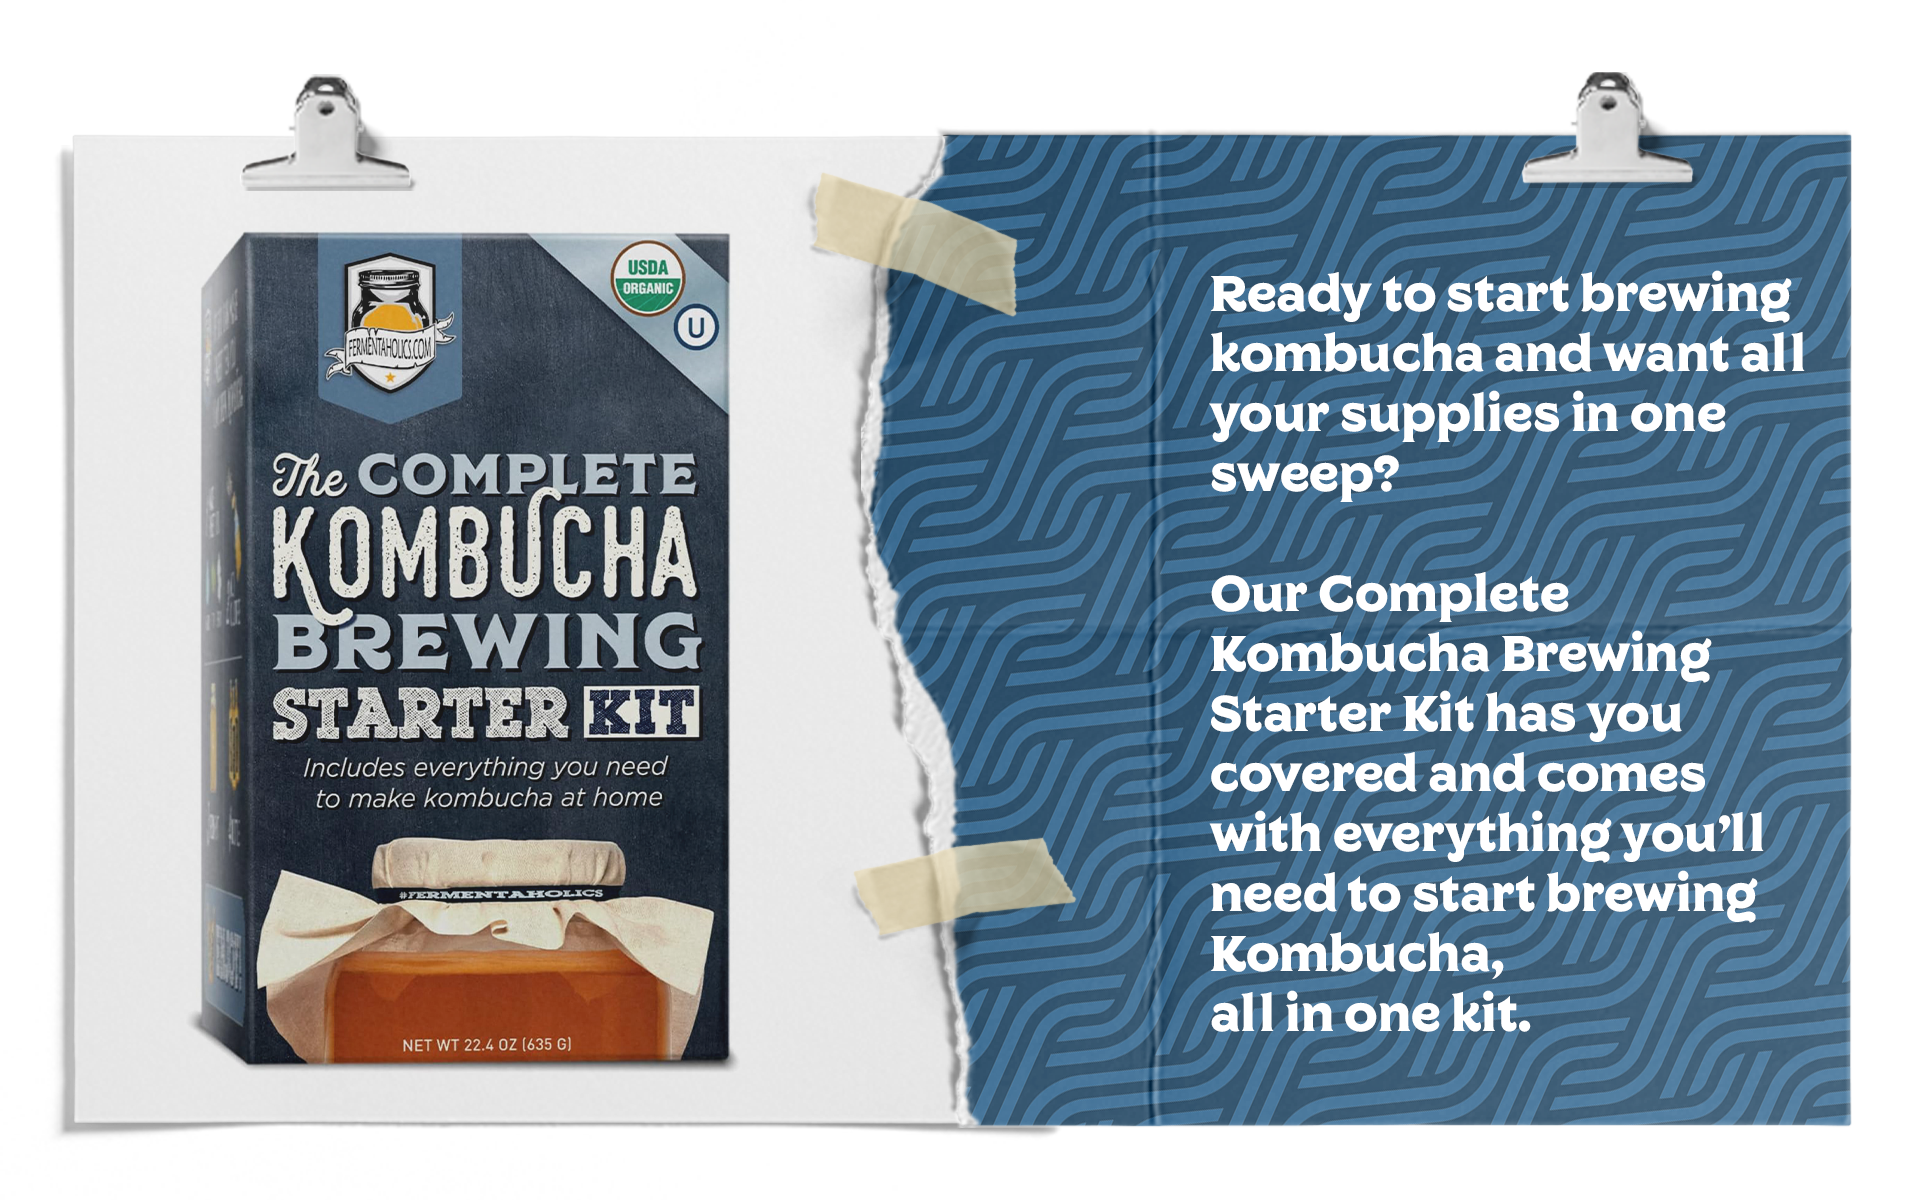 Ready to start brewing kombucha and want all your supplies in one sweep? Our Complete Kombucha Brewing Starter Kit has you covered and comes with everything you’ll need to start brewing Kombucha,all in one kit. 